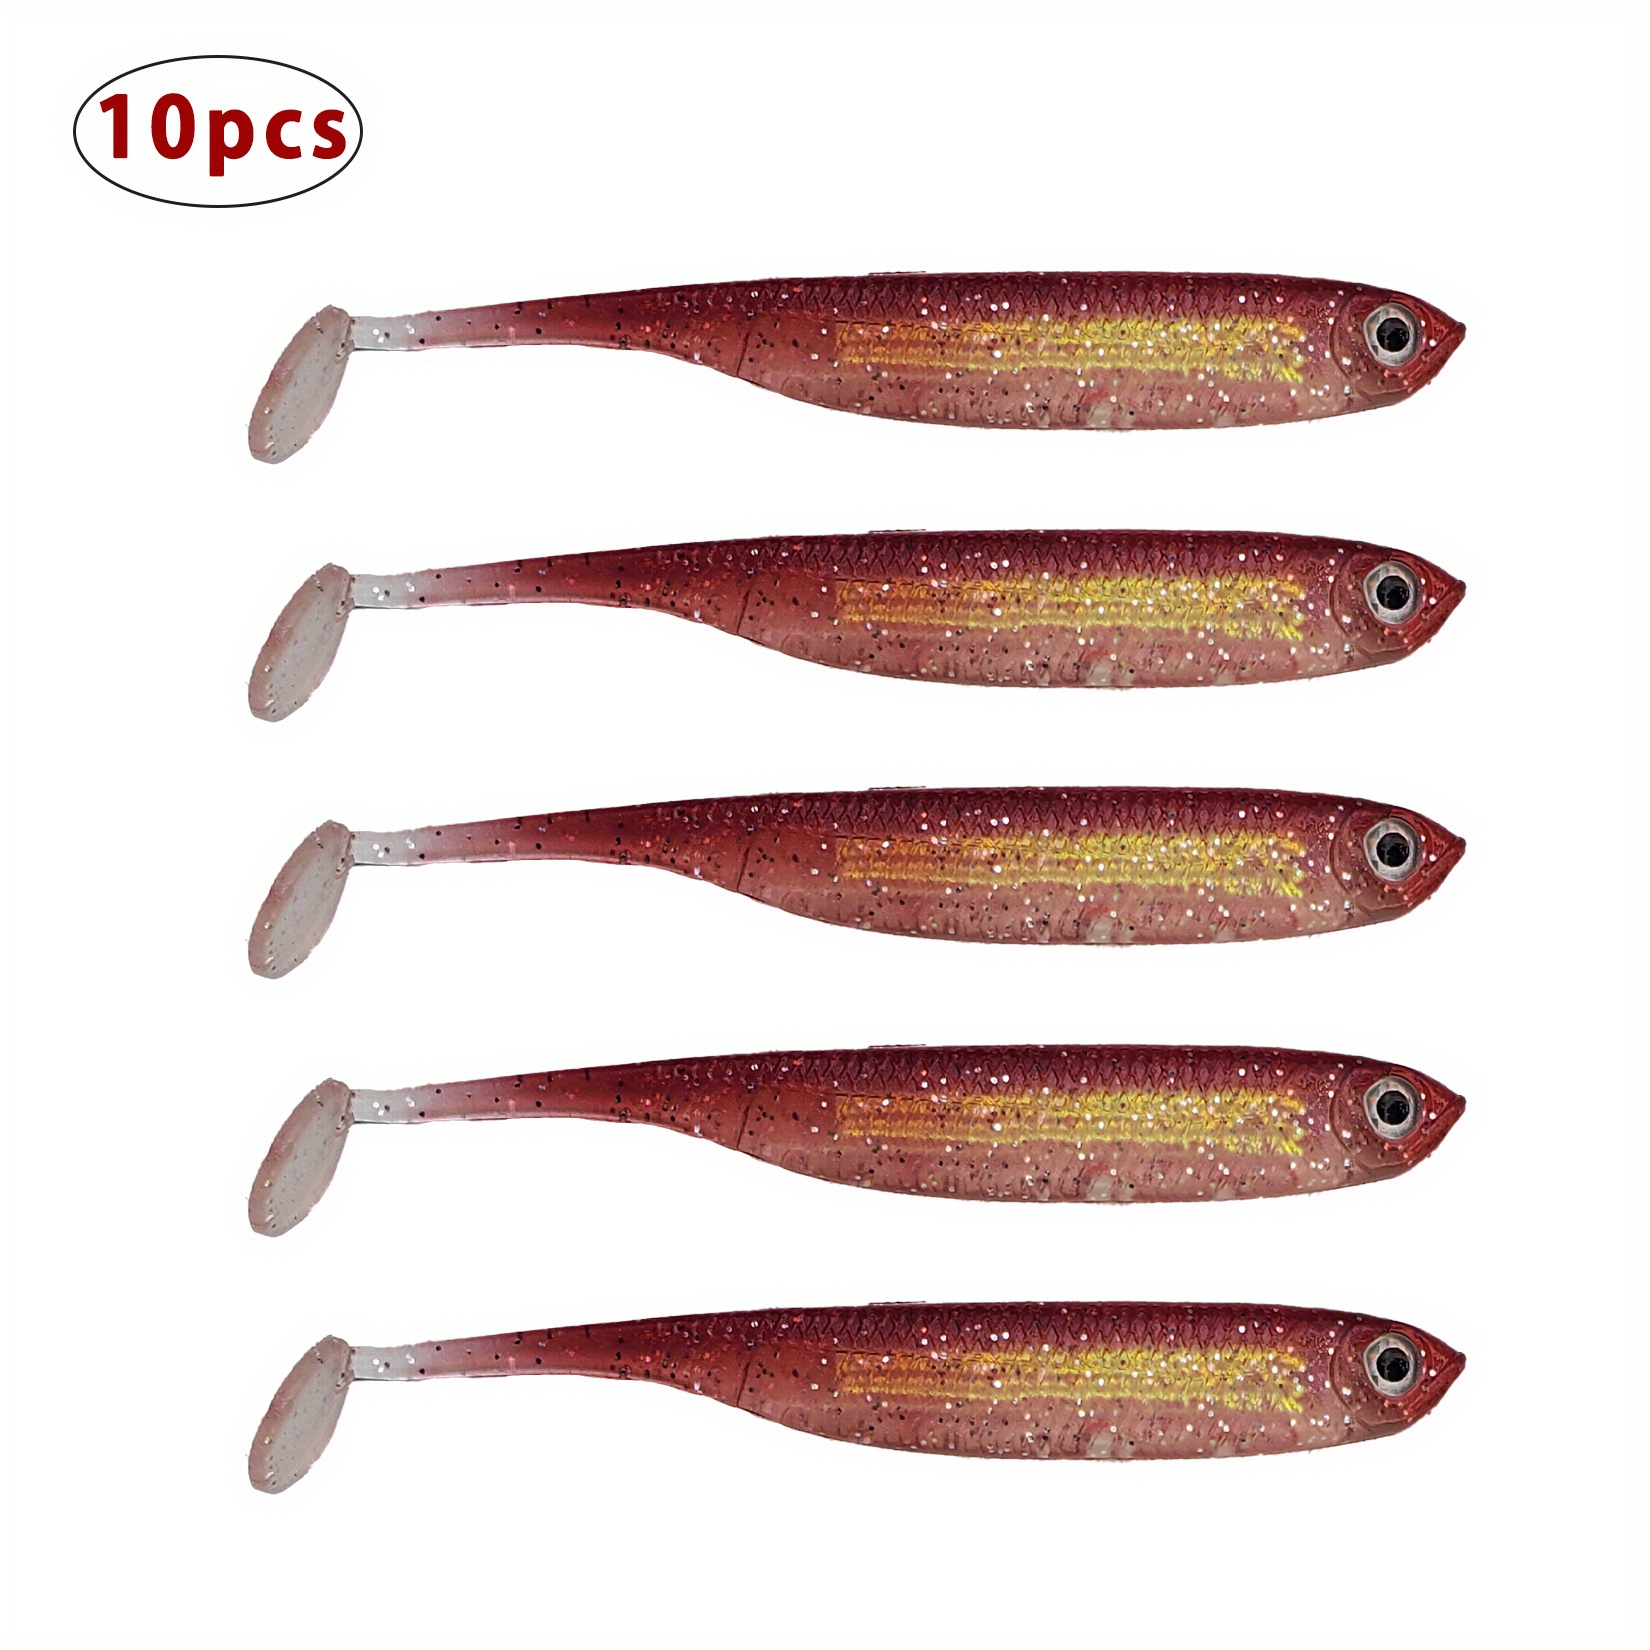 10pcs Paddle Tail Swimbaits: Catch More Bass With Soft, 49% OFF